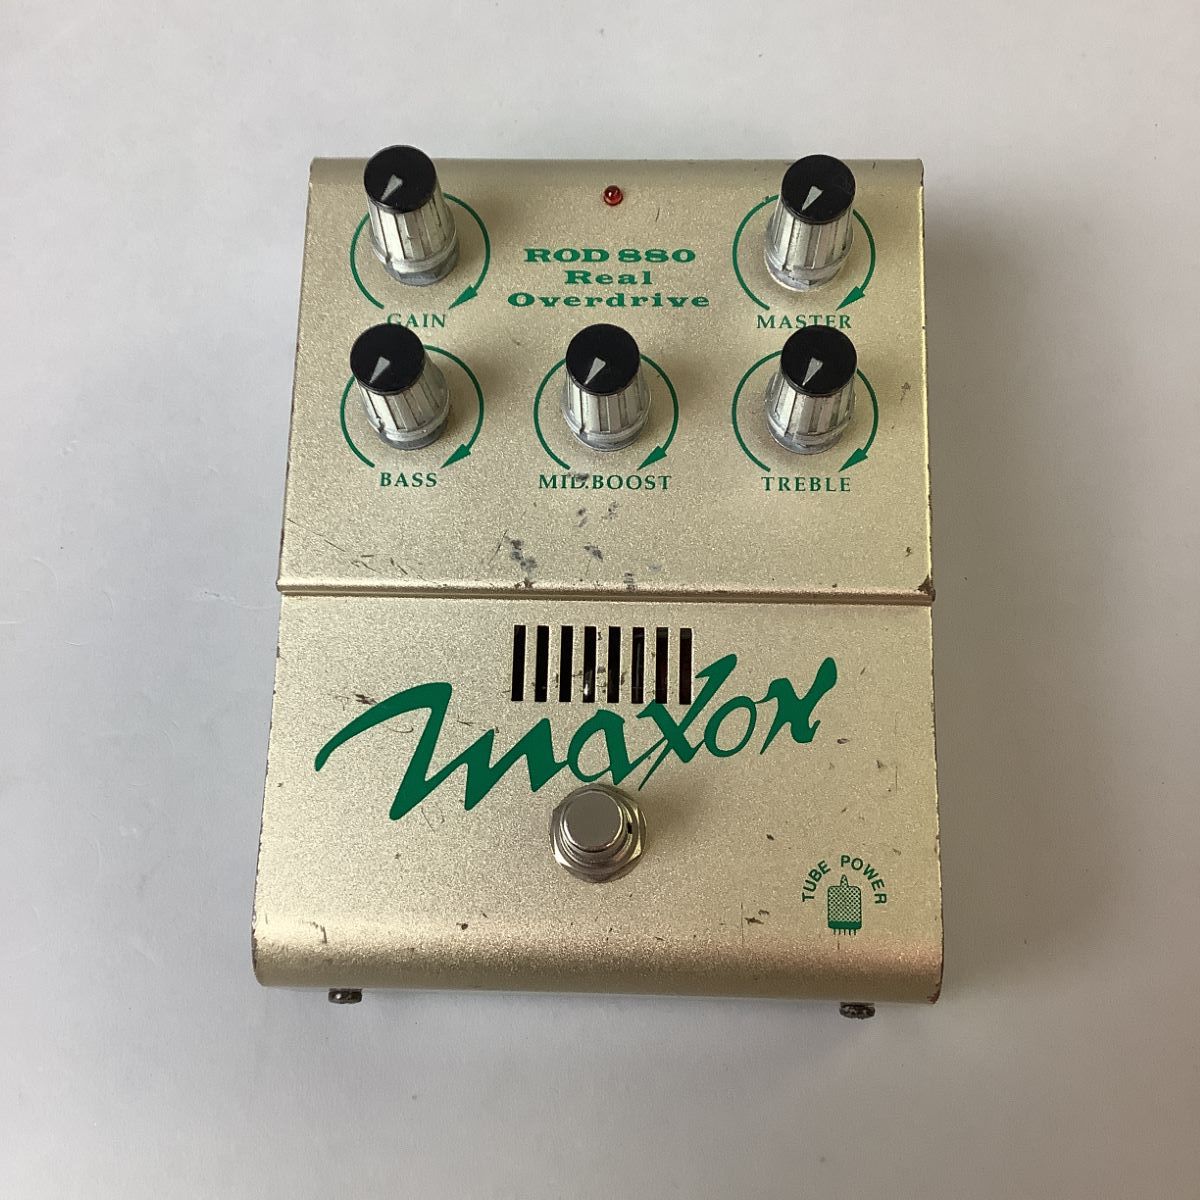 maxon ROD880 Real Overdrive